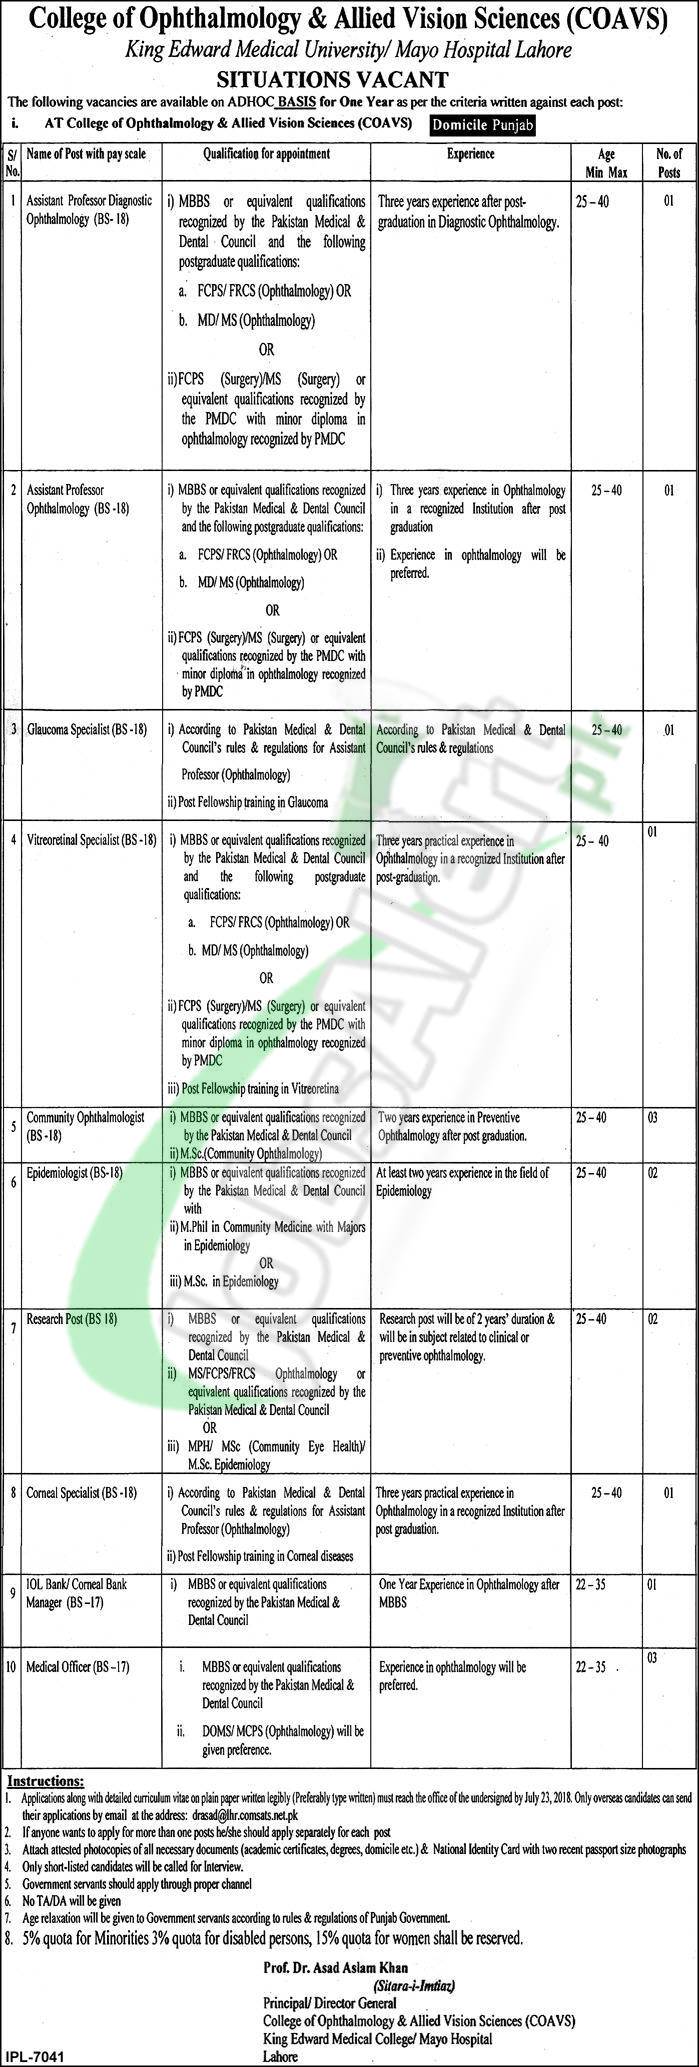 Government Jobs in Lahore